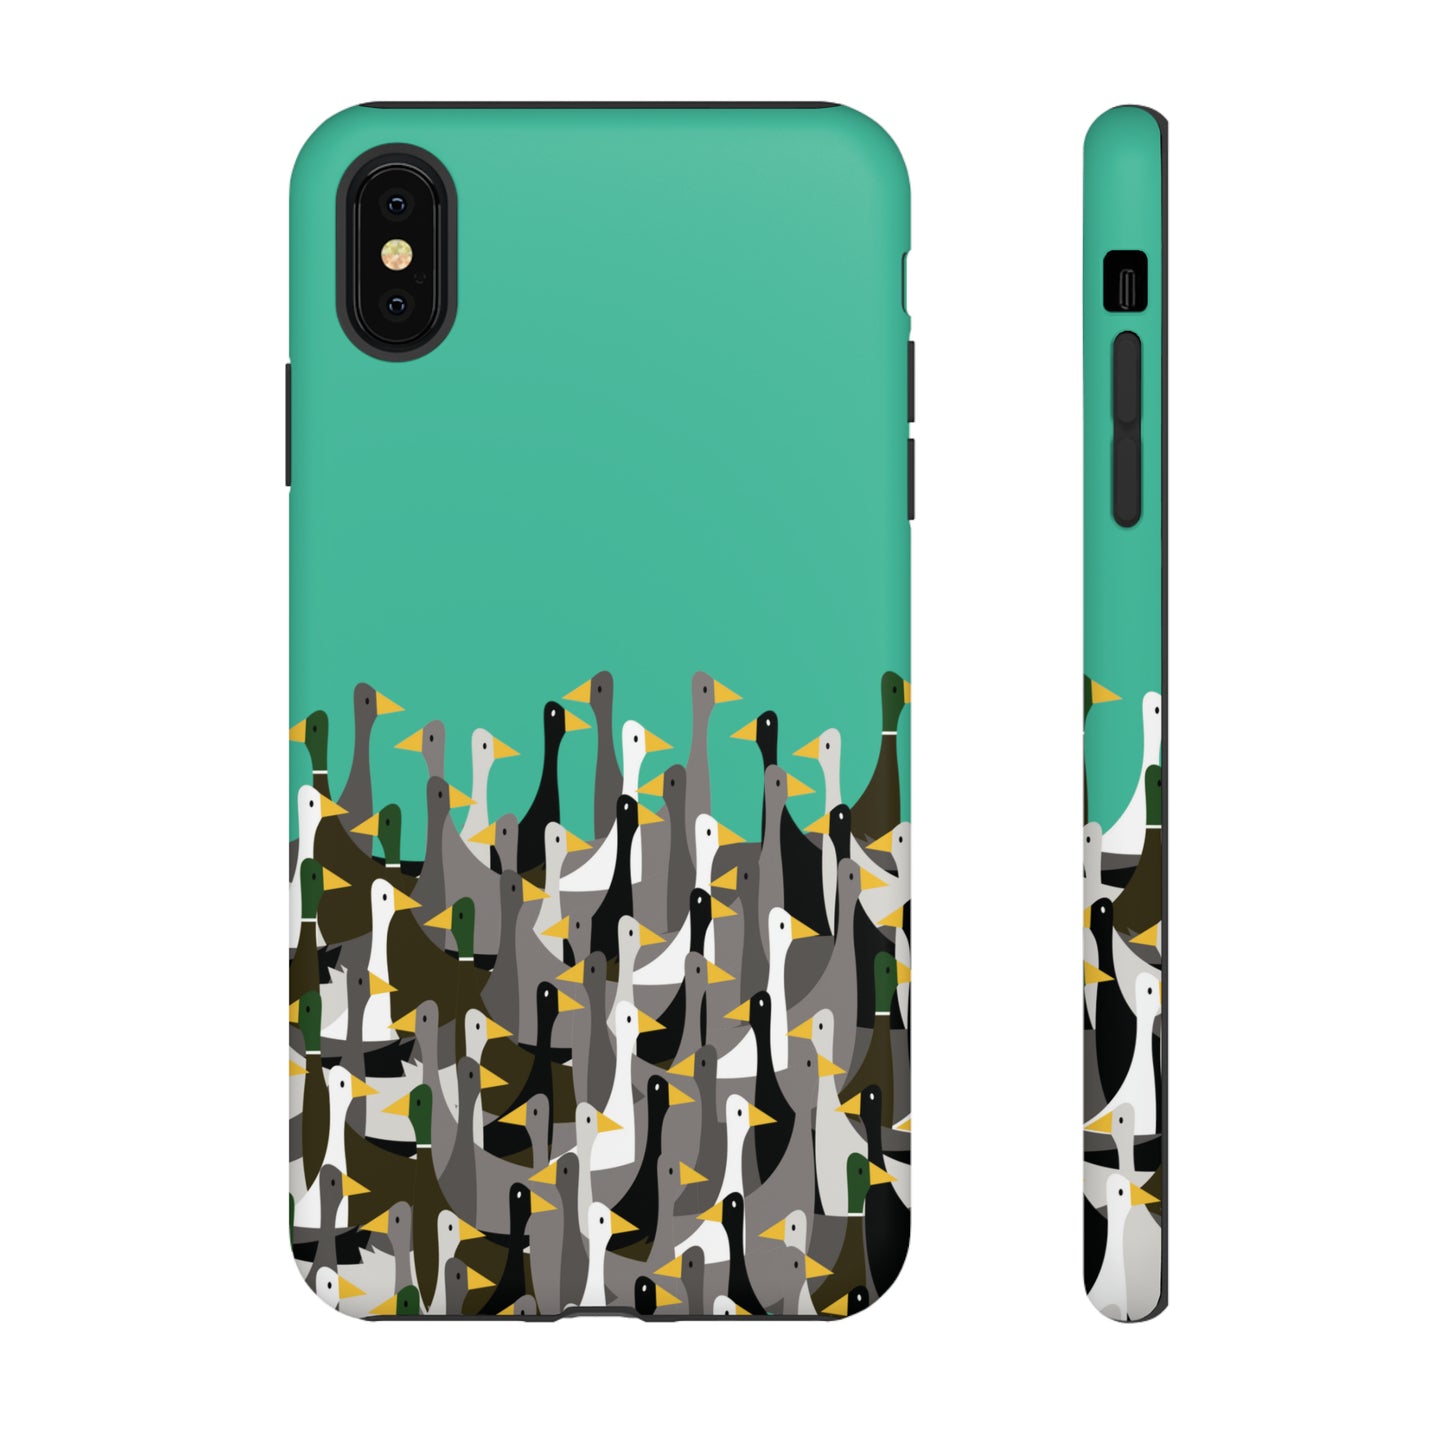 That is a LOT of ducks -Turquoise 12d3ad - Tough Cases